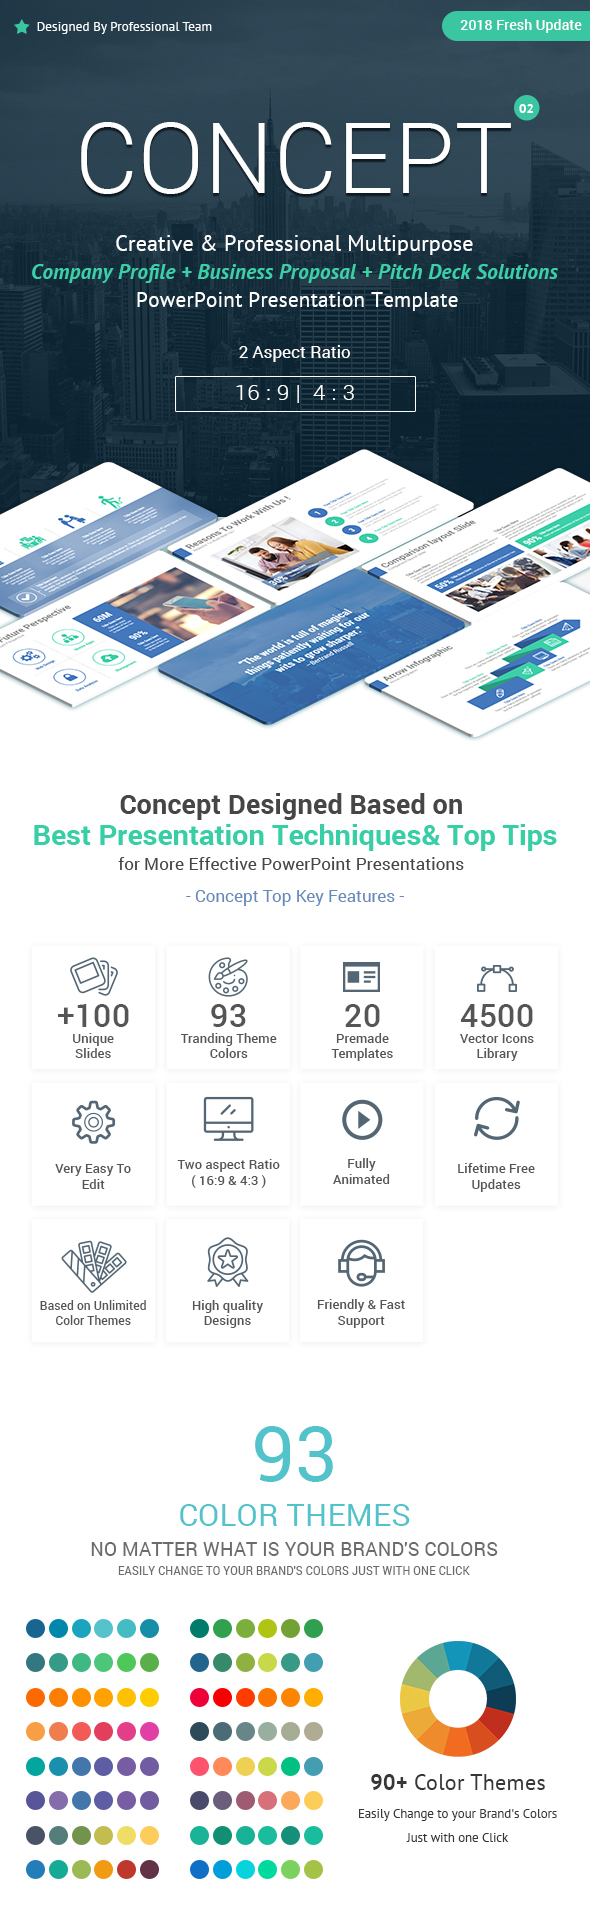 Concept Company Profile and Business Proposal PowerPoint Templates